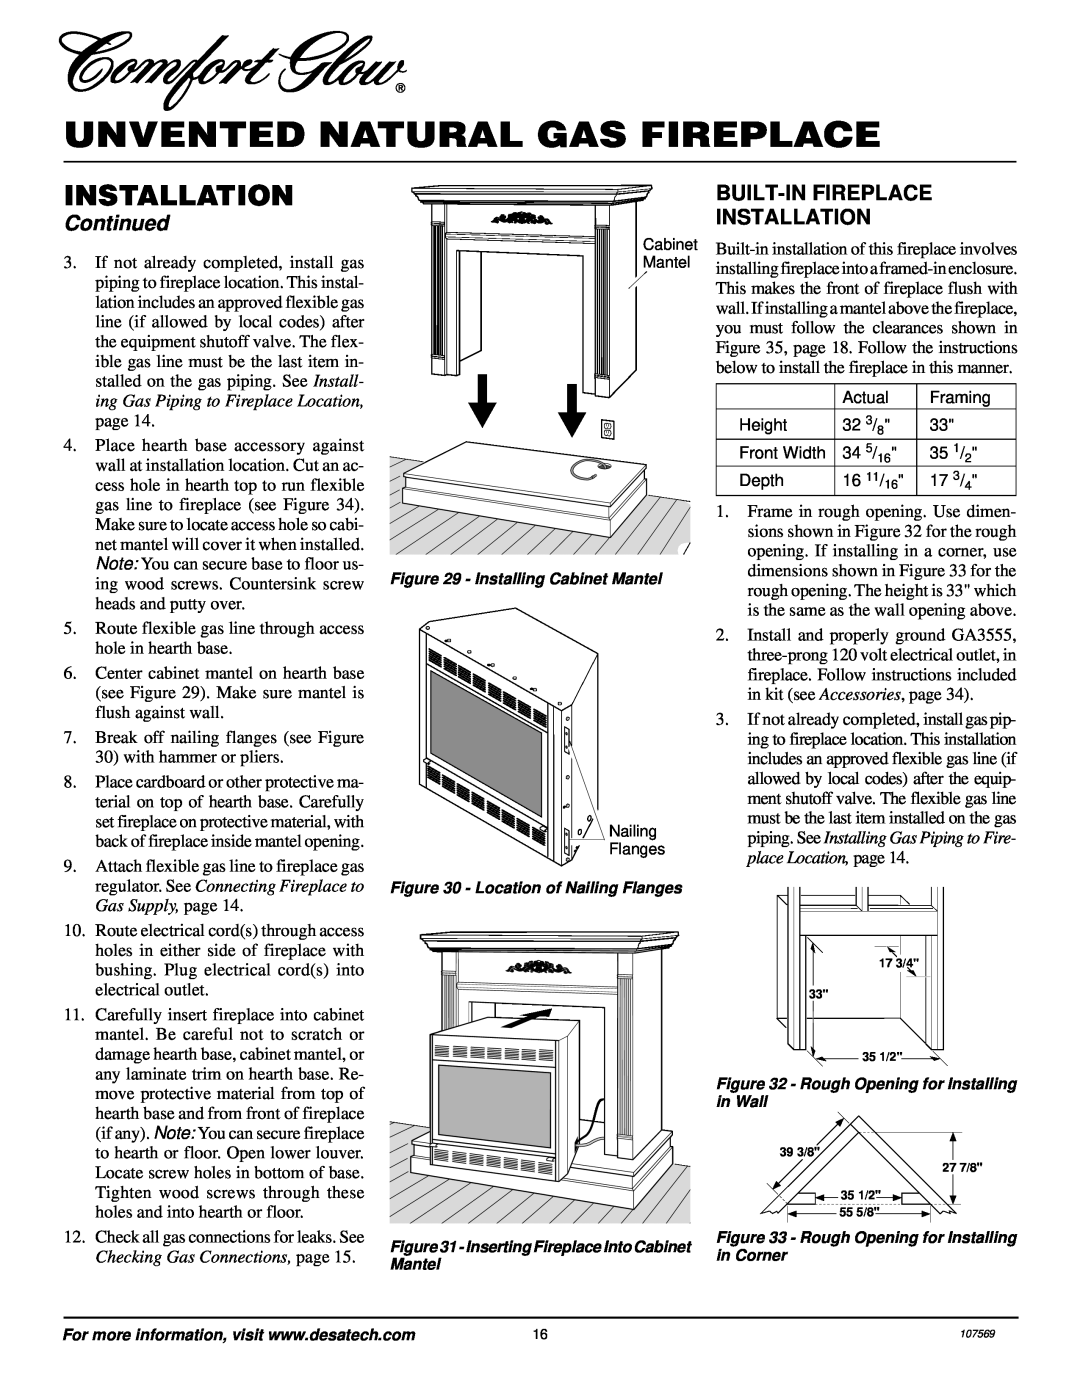 Desa CGEFP33NR installation manual Built-Infireplace Installation, Unvented Natural Gas Fireplace, Continued 